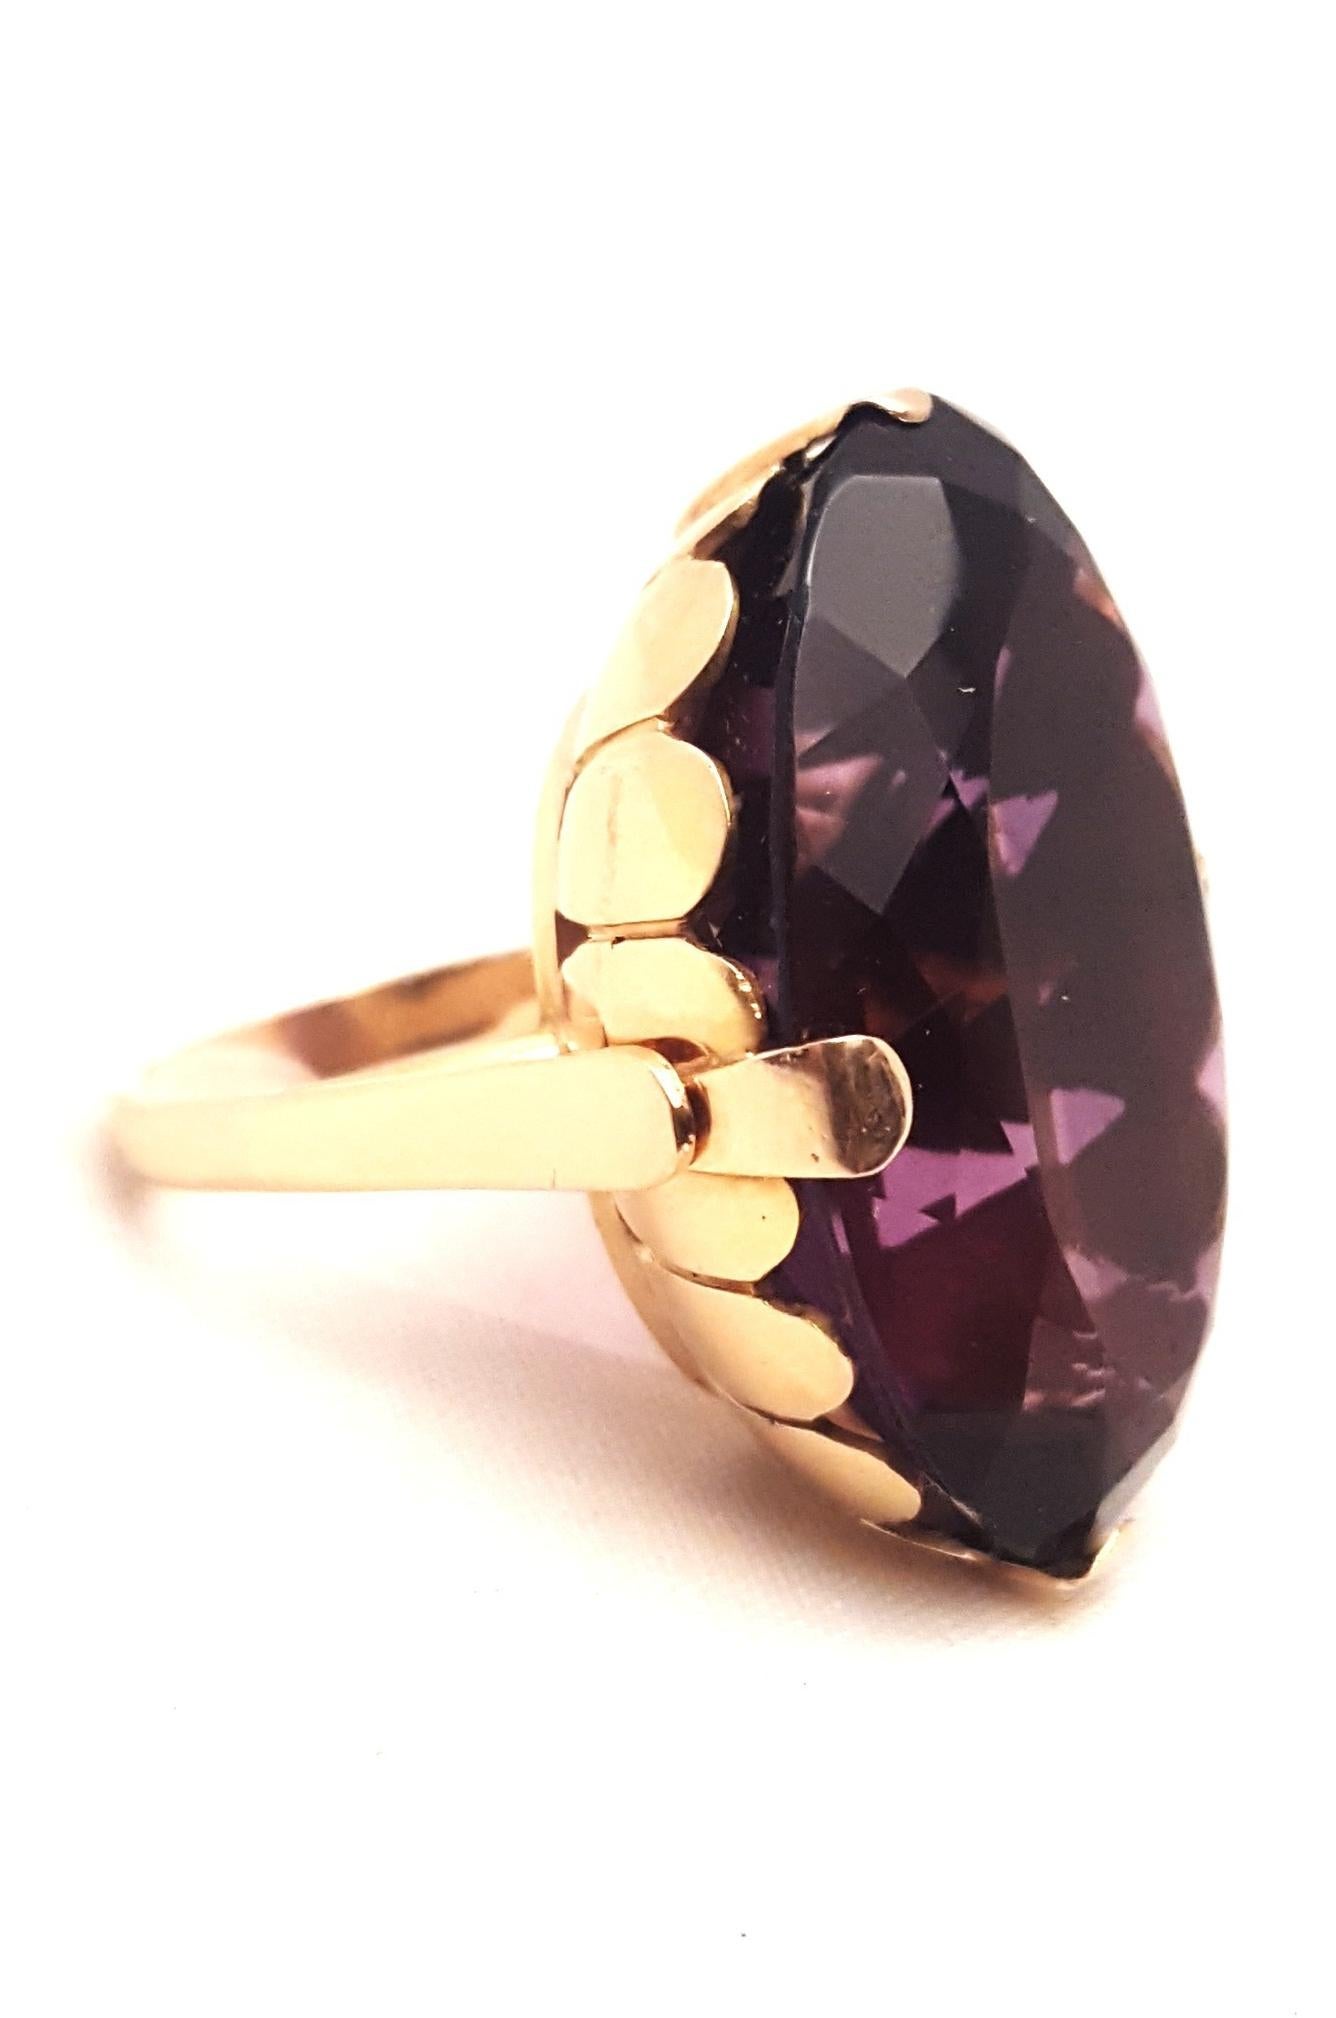 From the 1930's and as current as today!  This statement ring boasts an oval faceted amethyst weighing approximately 70 carats!  Color saturation is deep and even.  Gorgeous amethyst!  Hand fabricated setting in 18 karat yellow gold shows amethyst